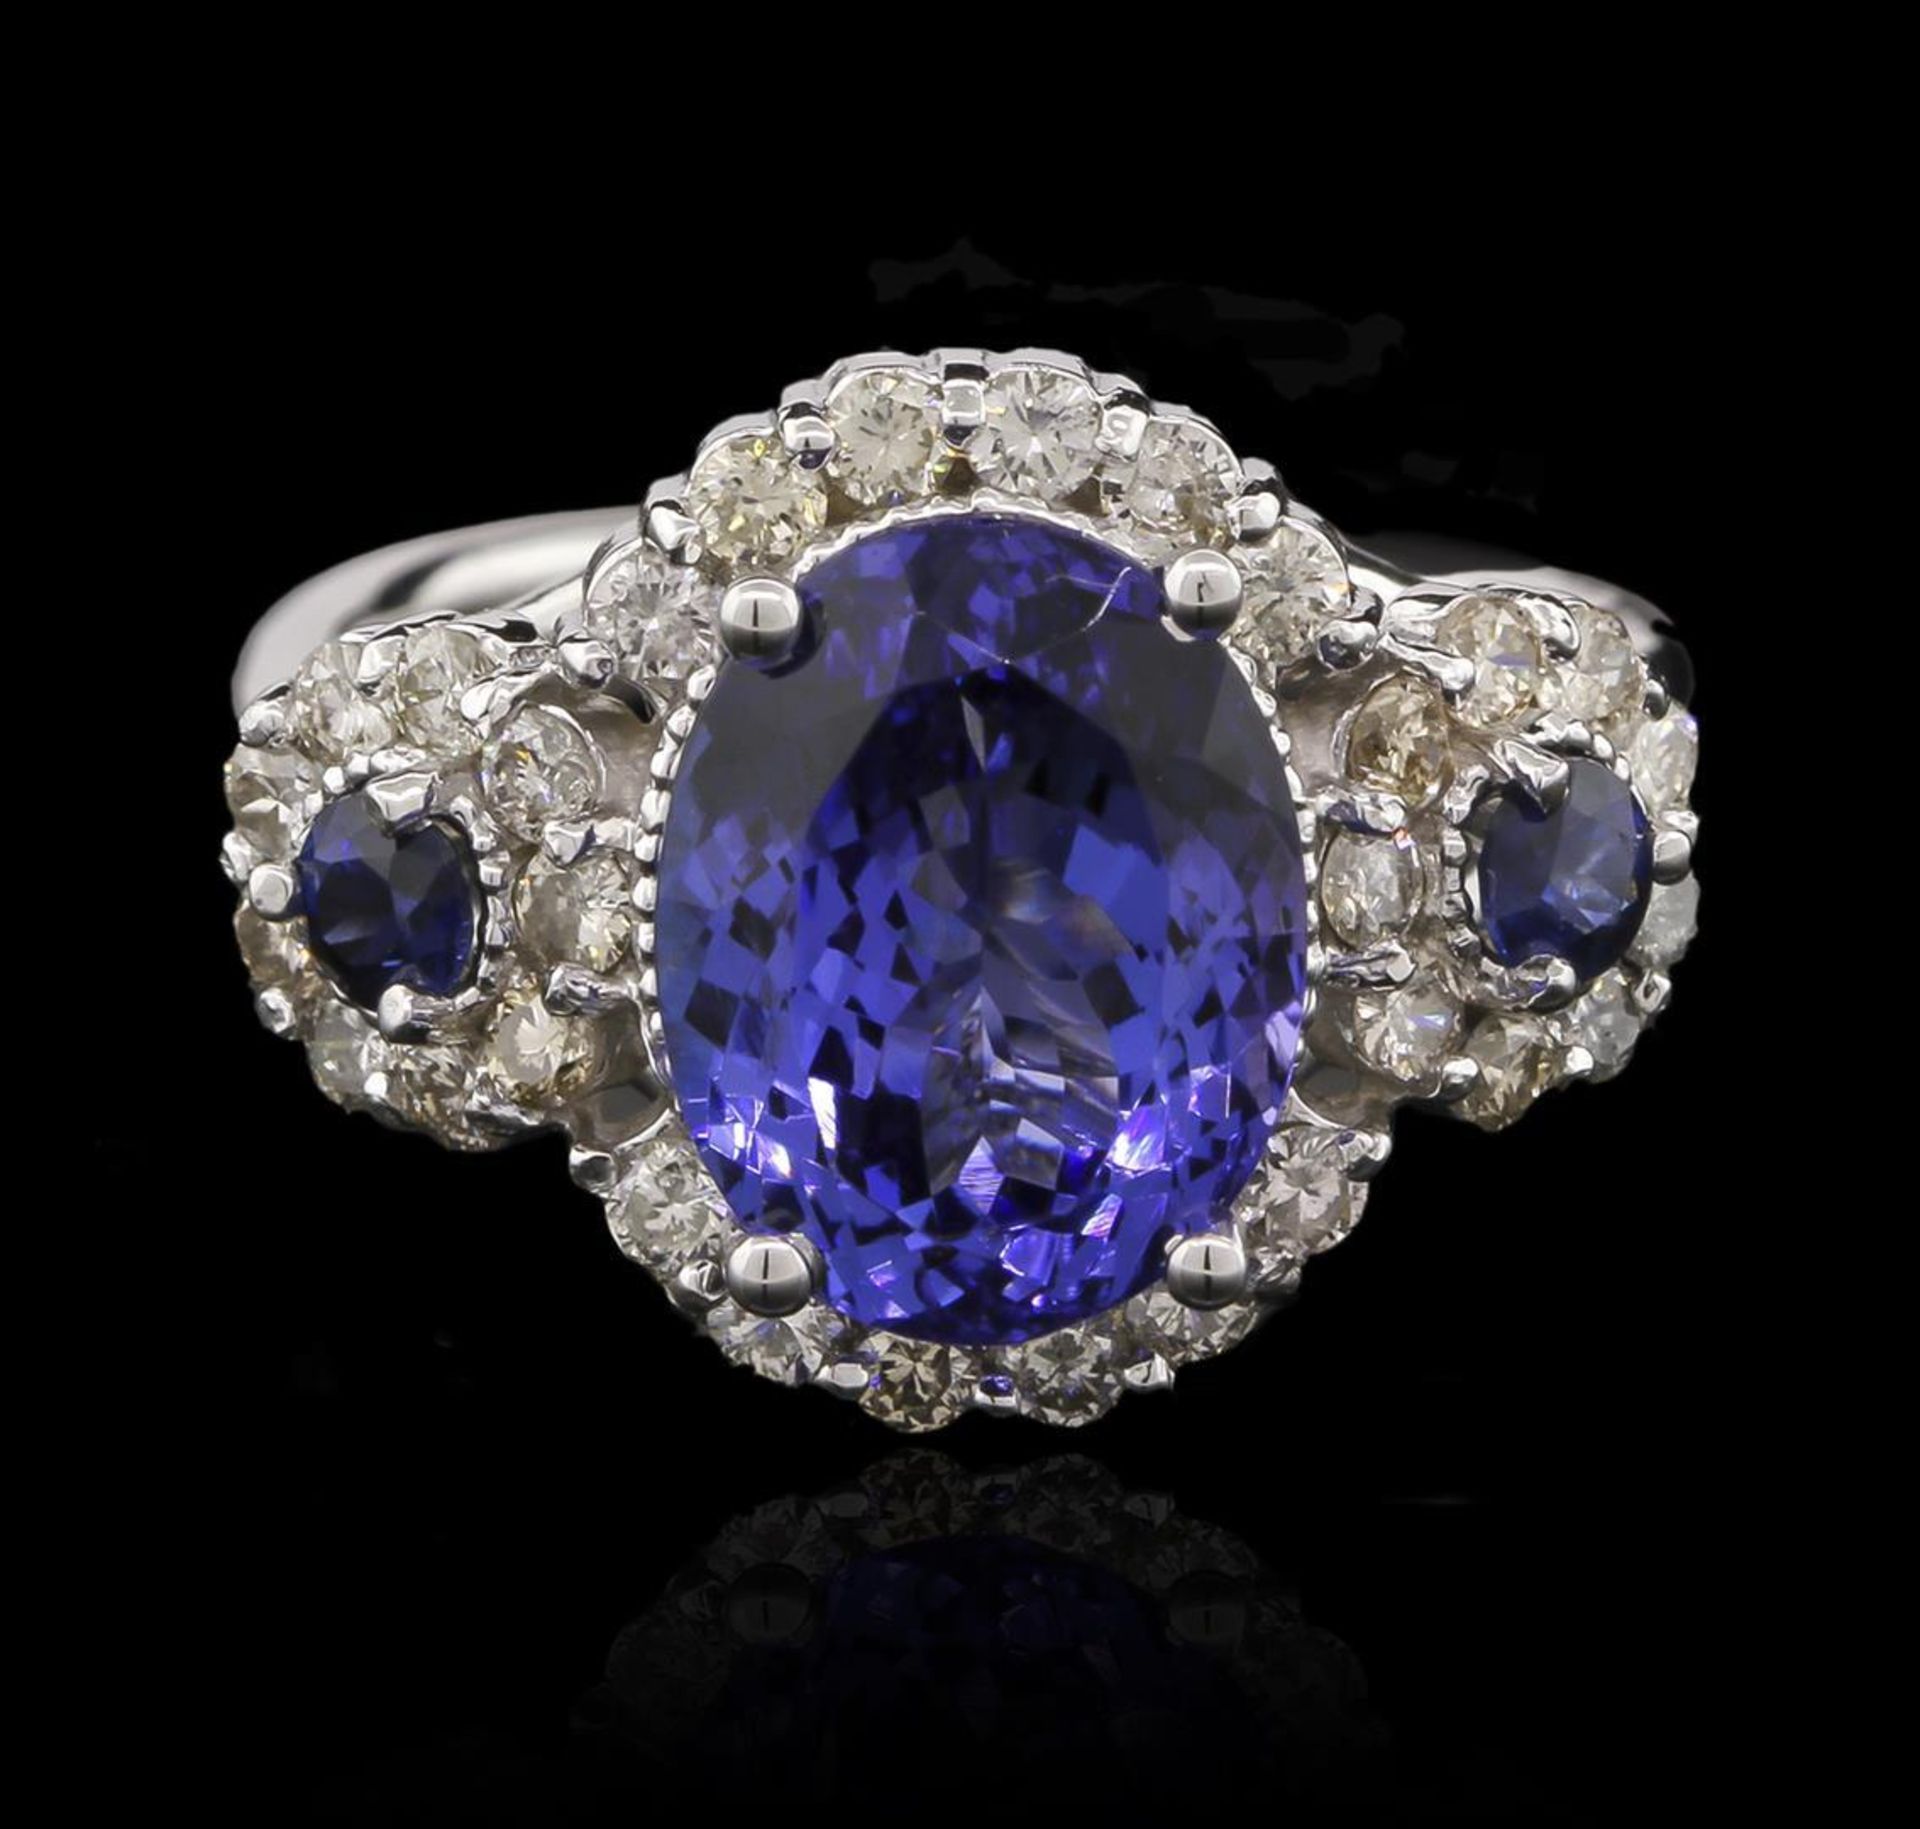 3.81 ctw Tanzanite, Blue Sapphire, and Diamond Ring - 14KT White Gold - Image 2 of 3